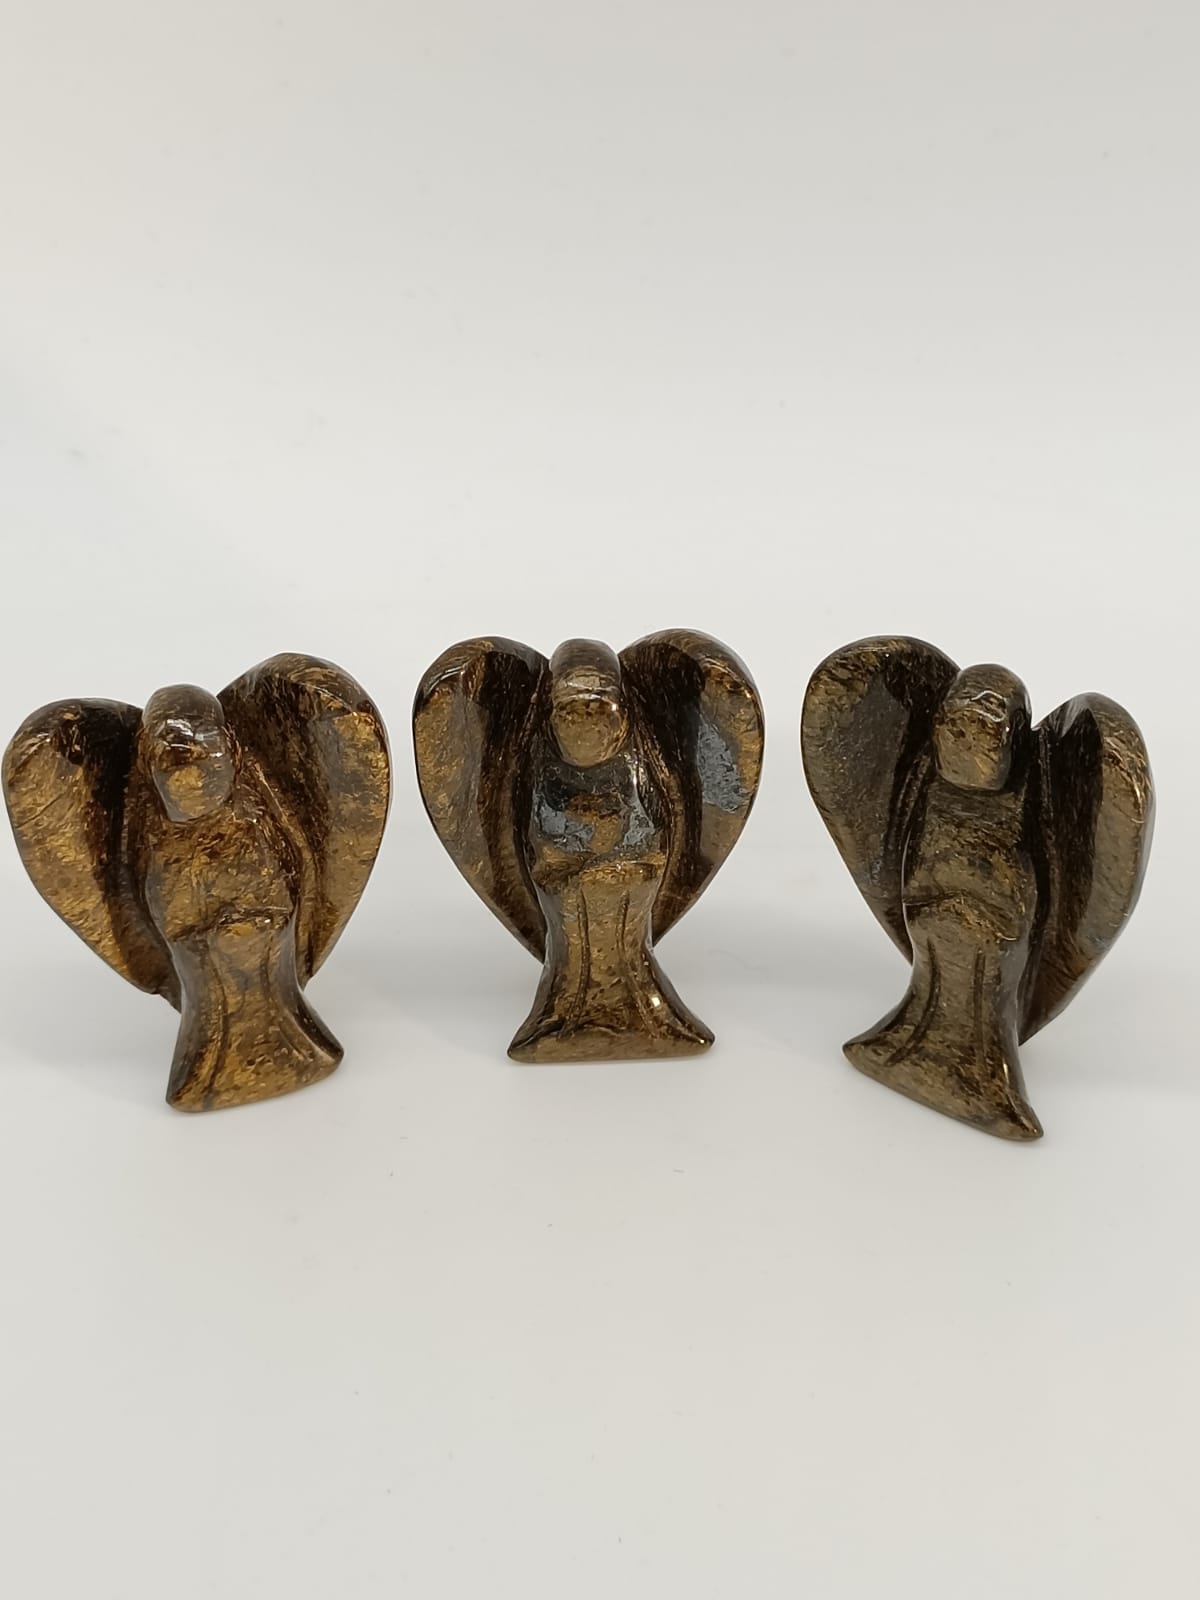 Come and Explore Our Guardian Angels Collection